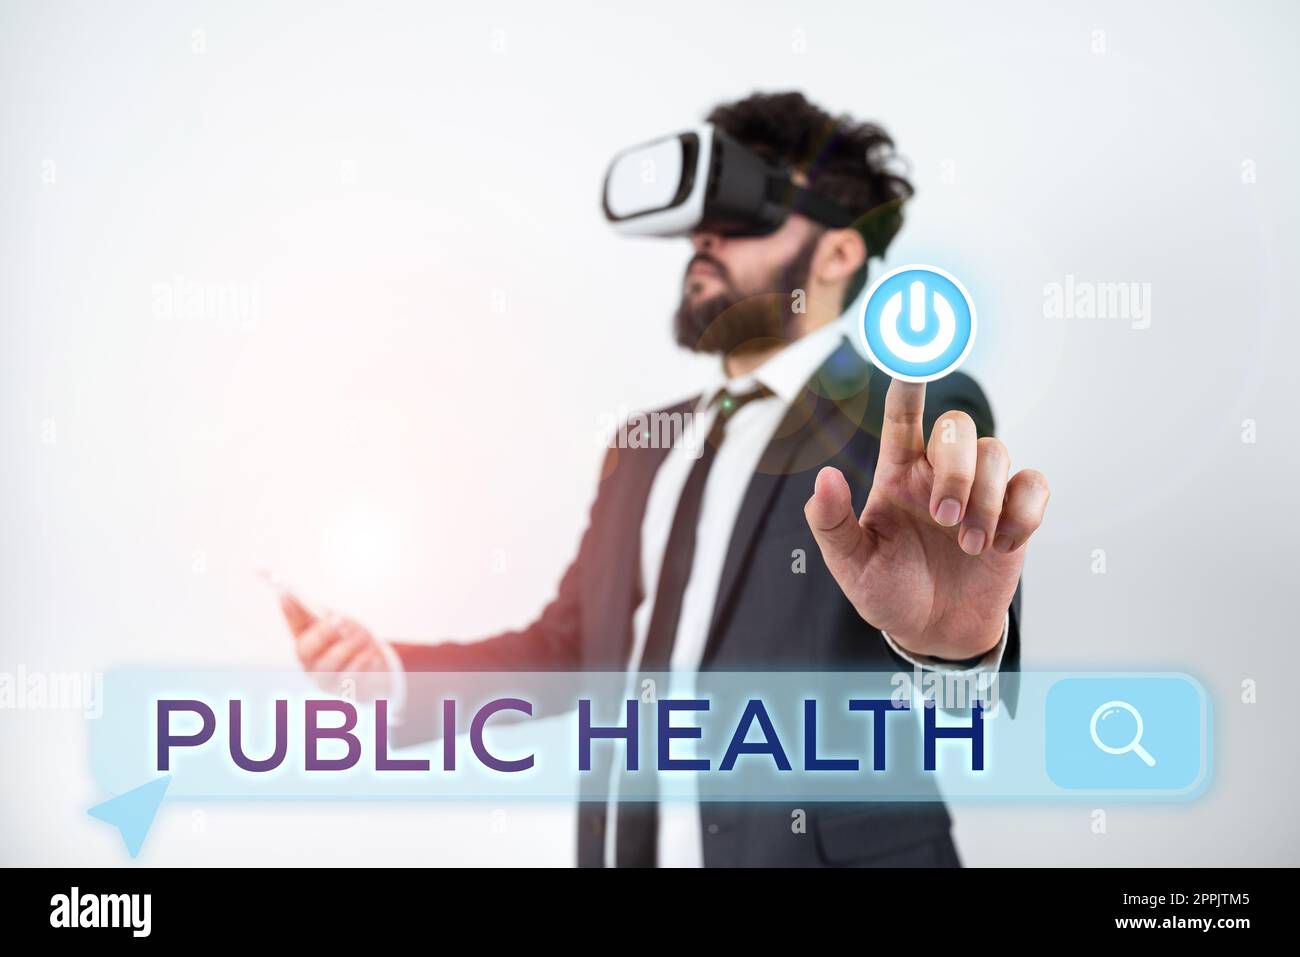 Conceptual display Public Health. Business concept Promoting healthy lifestyles to the community and its people Stock Photo